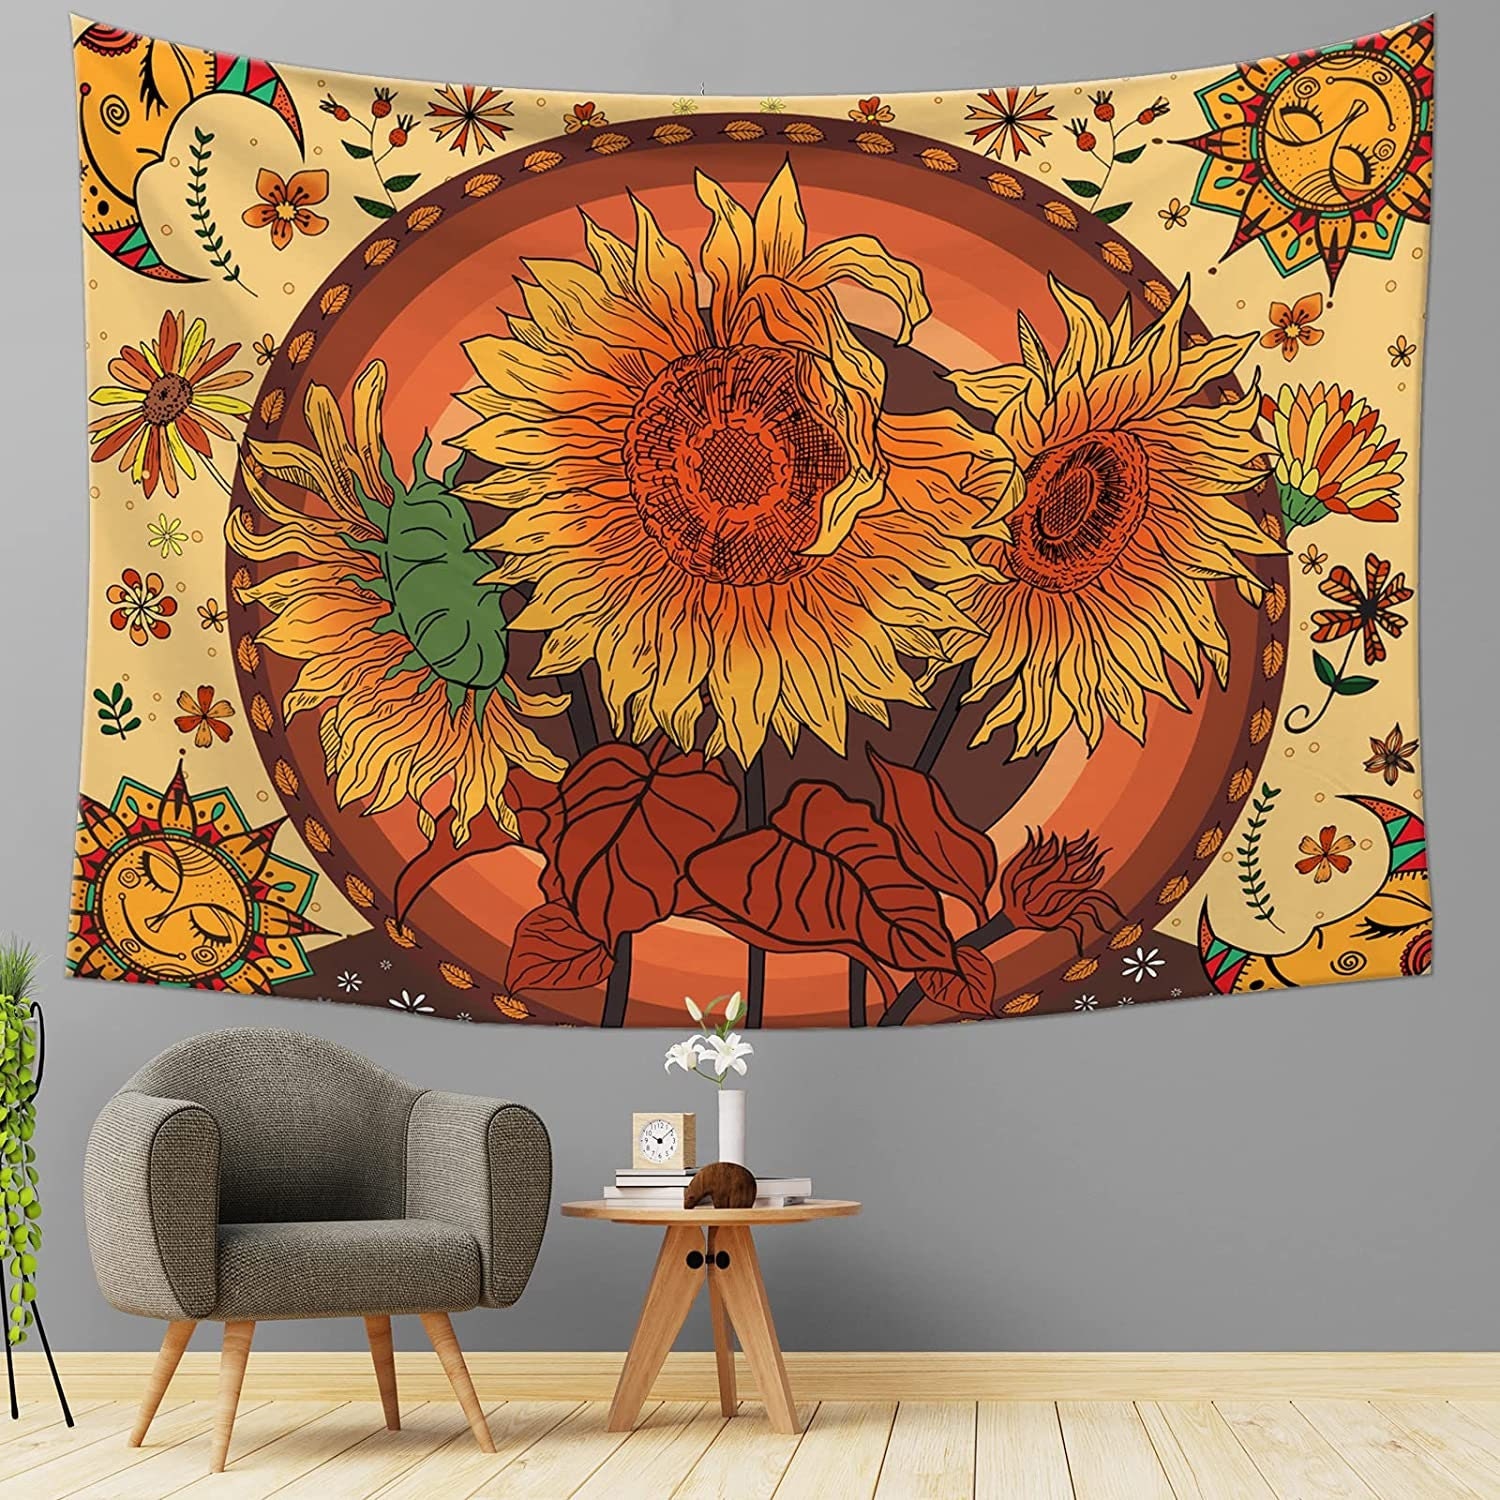 Discover Sunflower Tapestry Mandala Tapestry Wall Art Hanging Throw Home Decor Room Tapestries